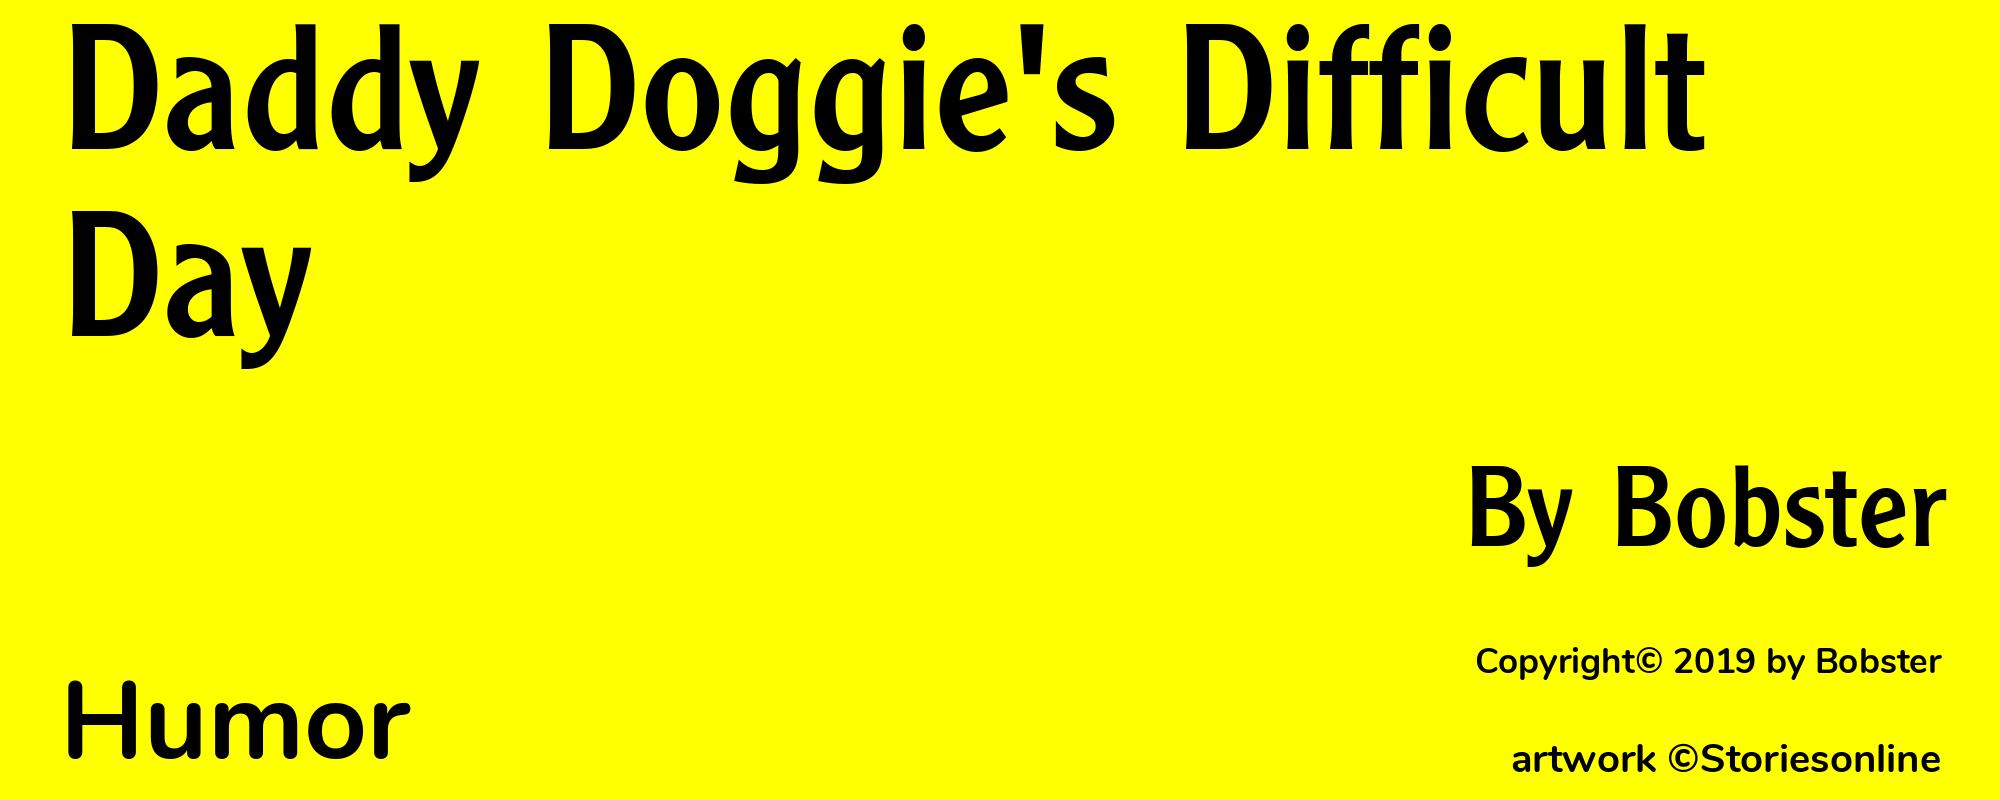 Daddy Doggie's Difficult Day - Cover